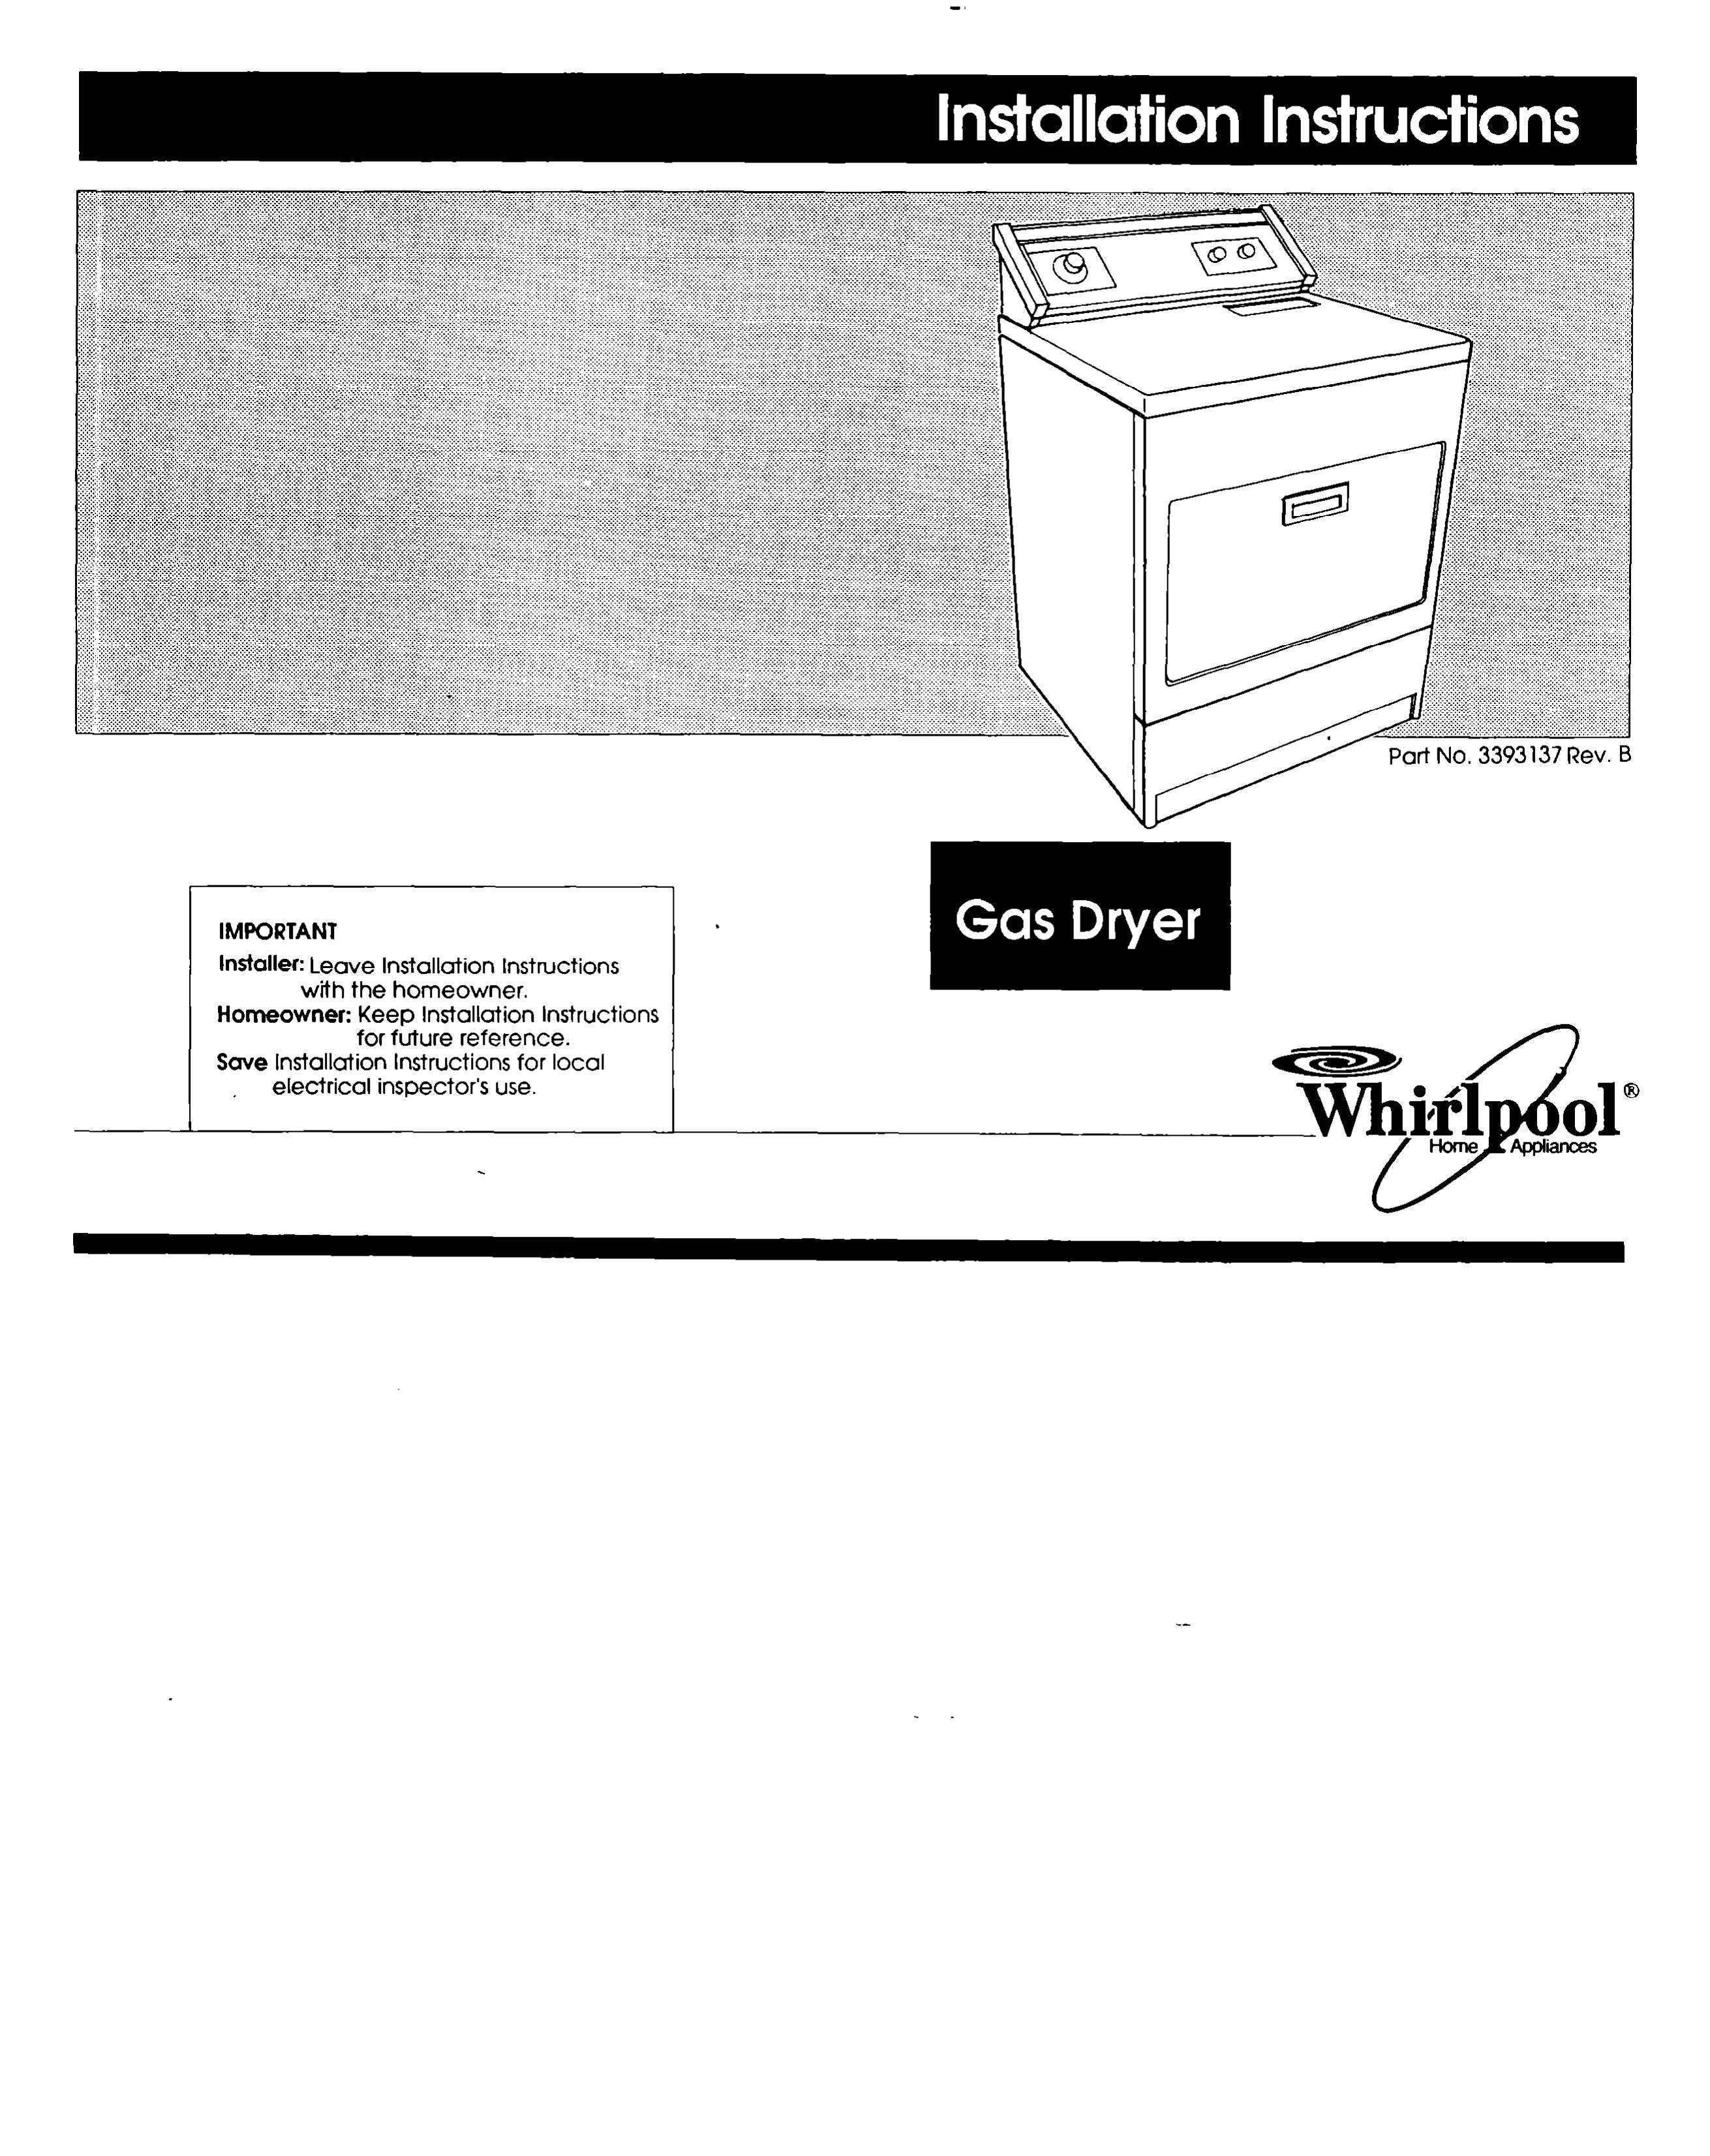 Whirlpool 3393 137 Clothes Dryer User Manual